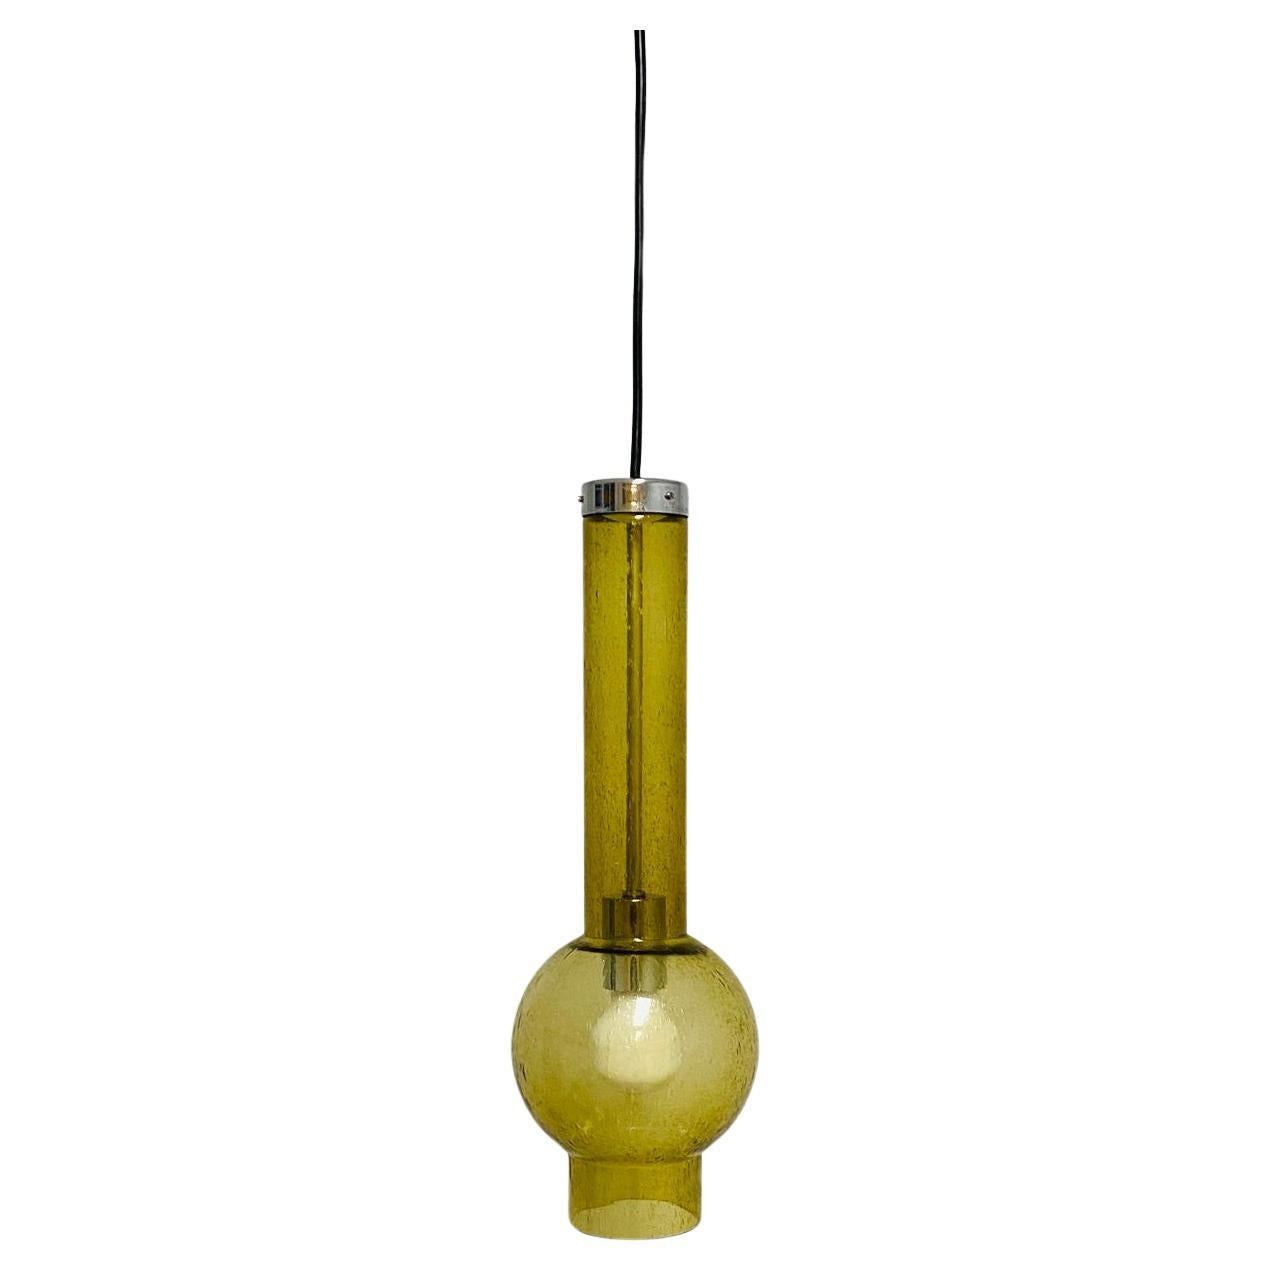 Yellow Bubble Art Glass Tube "P1115" Penant Lamp by Staff Leuchten, Germany 1960 For Sale